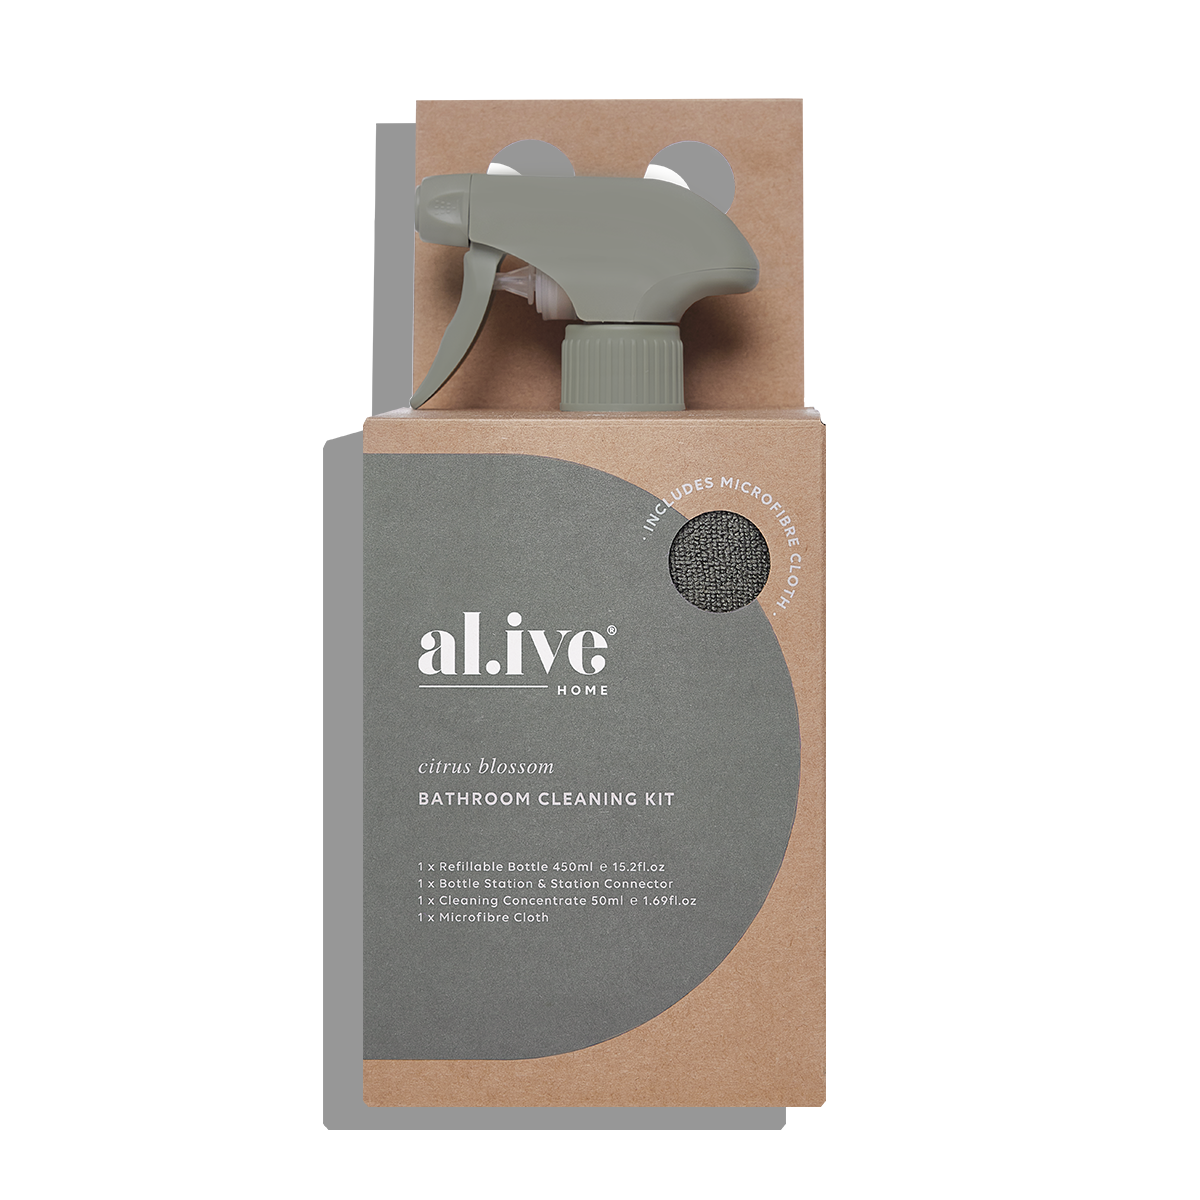 ALIVE BODY BATHROOM CLEANING KIT